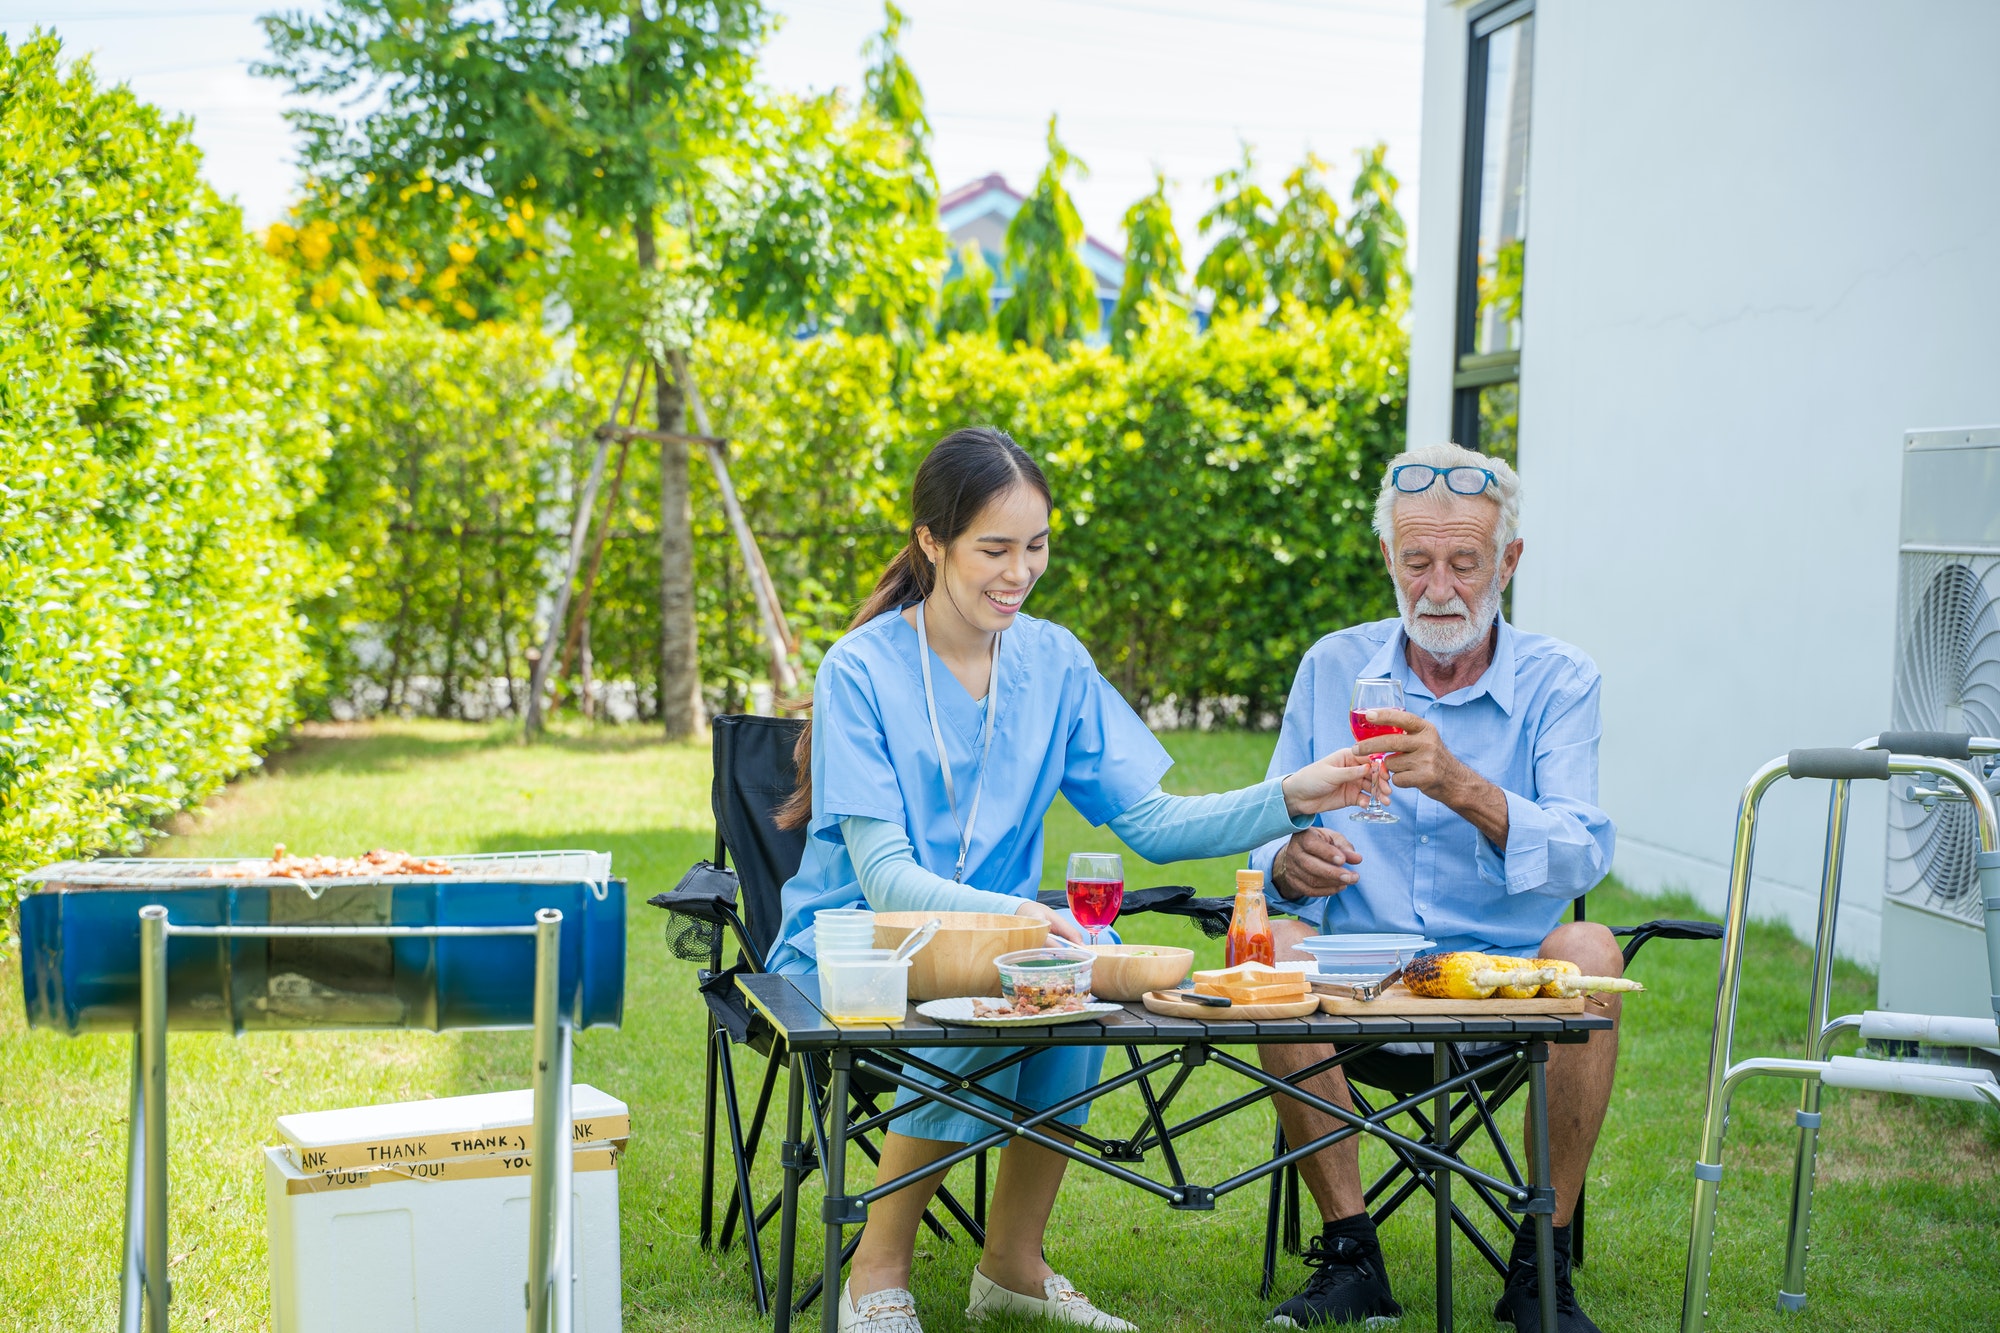 Elderly caregiver and man having a picnic in the garden on sunny day.